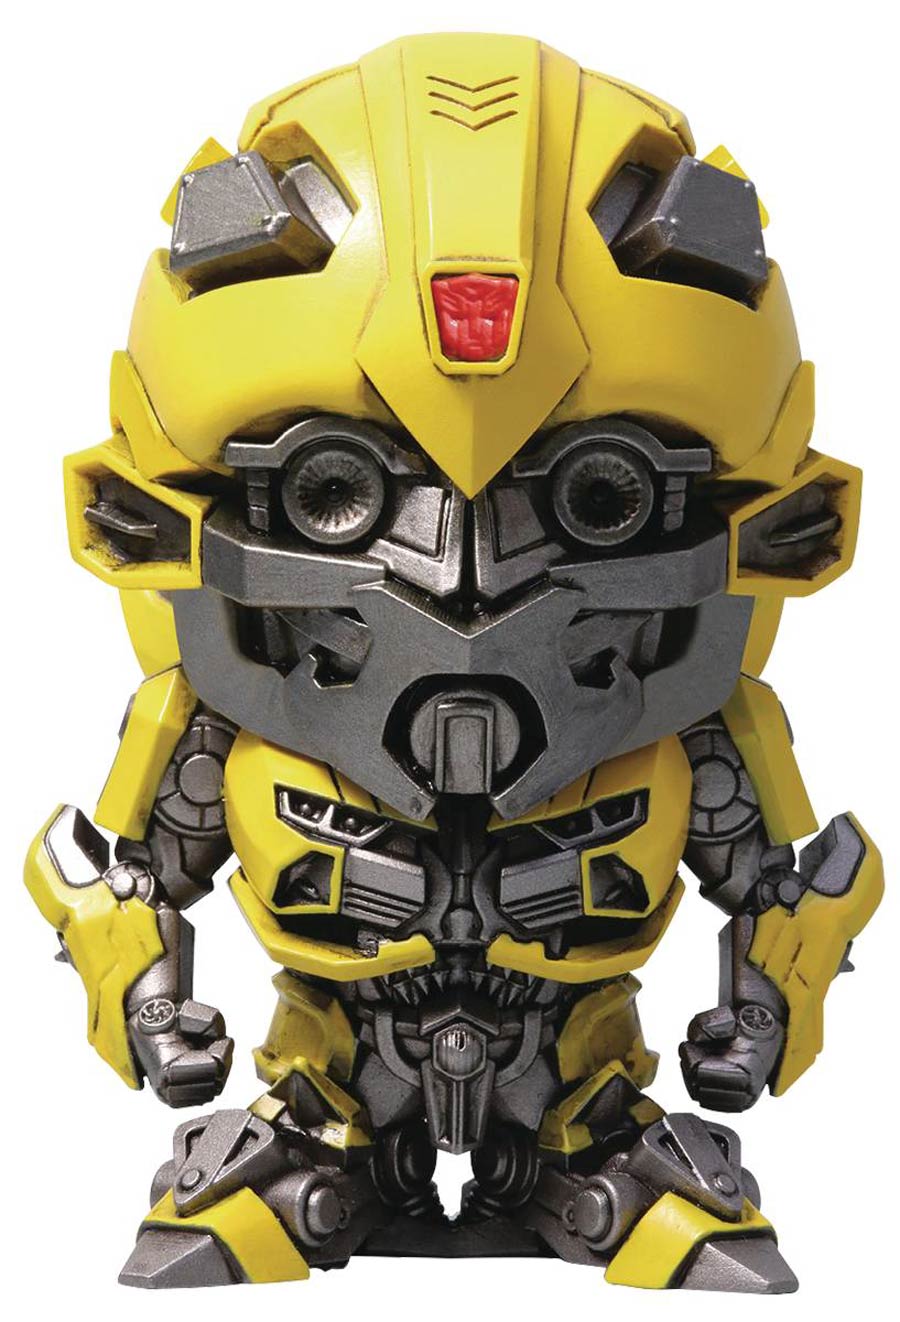 Transformers The Last Knight Bumblebee 4-Inch PVC Figure